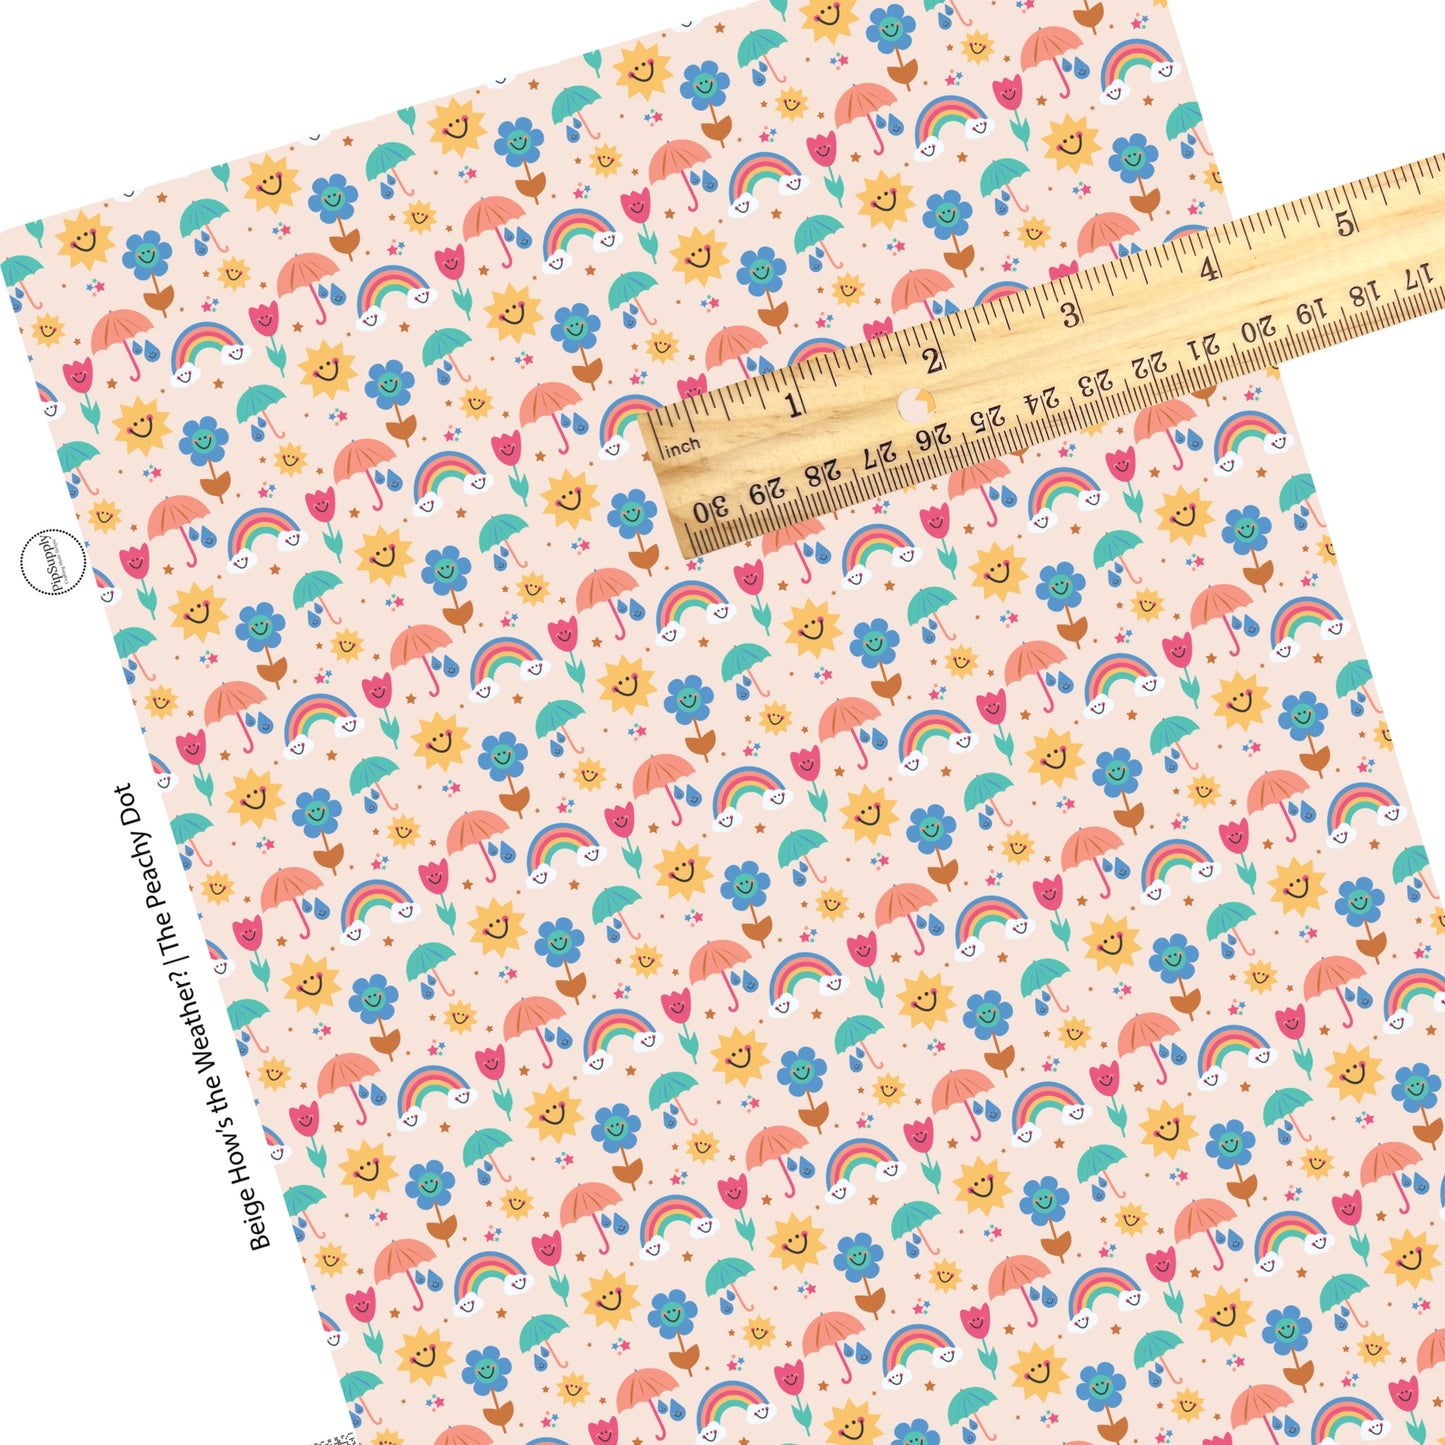 These spring floral pattern themed faux leather sheets contain the following design elements: colorful flowers, rainbows, suns, umbrellas, and smiley faces on cream. Our CPSIA compliant faux leather sheets or rolls can be used for all types of crafting projects.